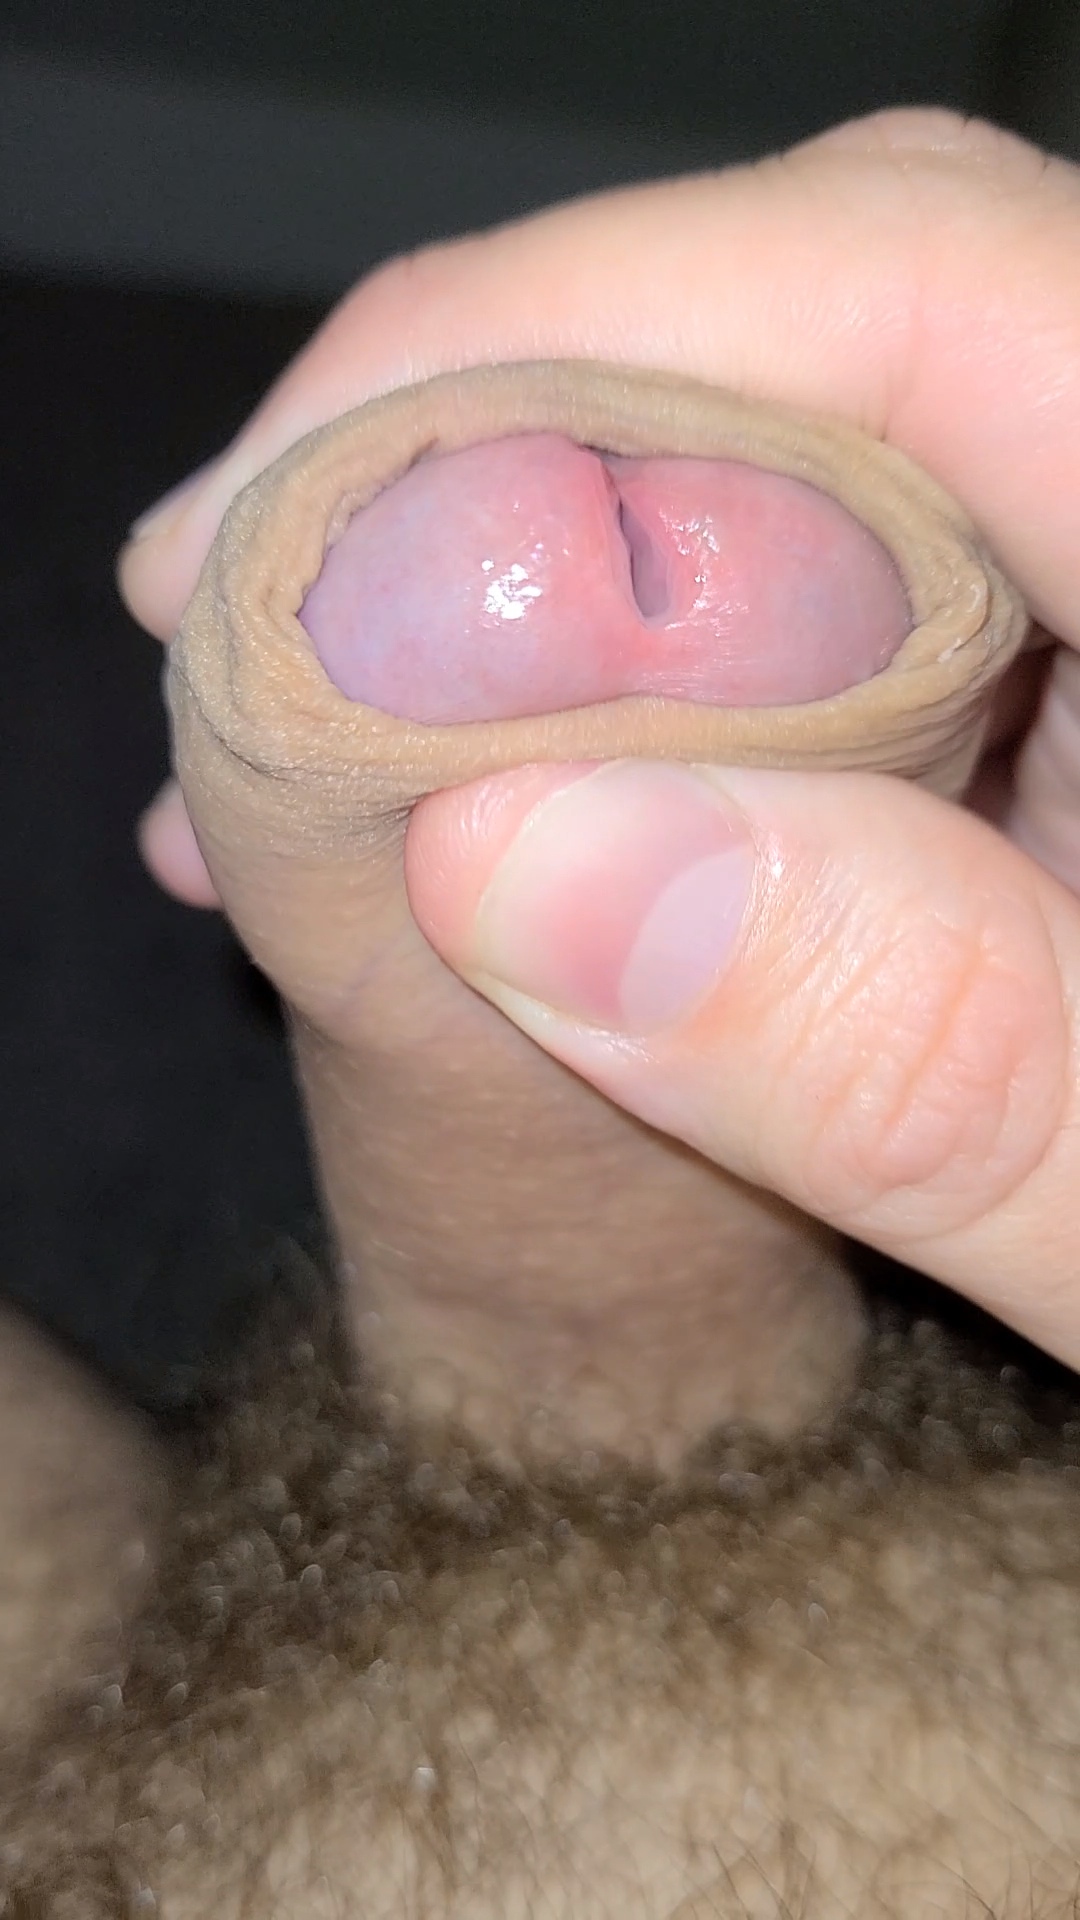 Stroking my thick uncut cock